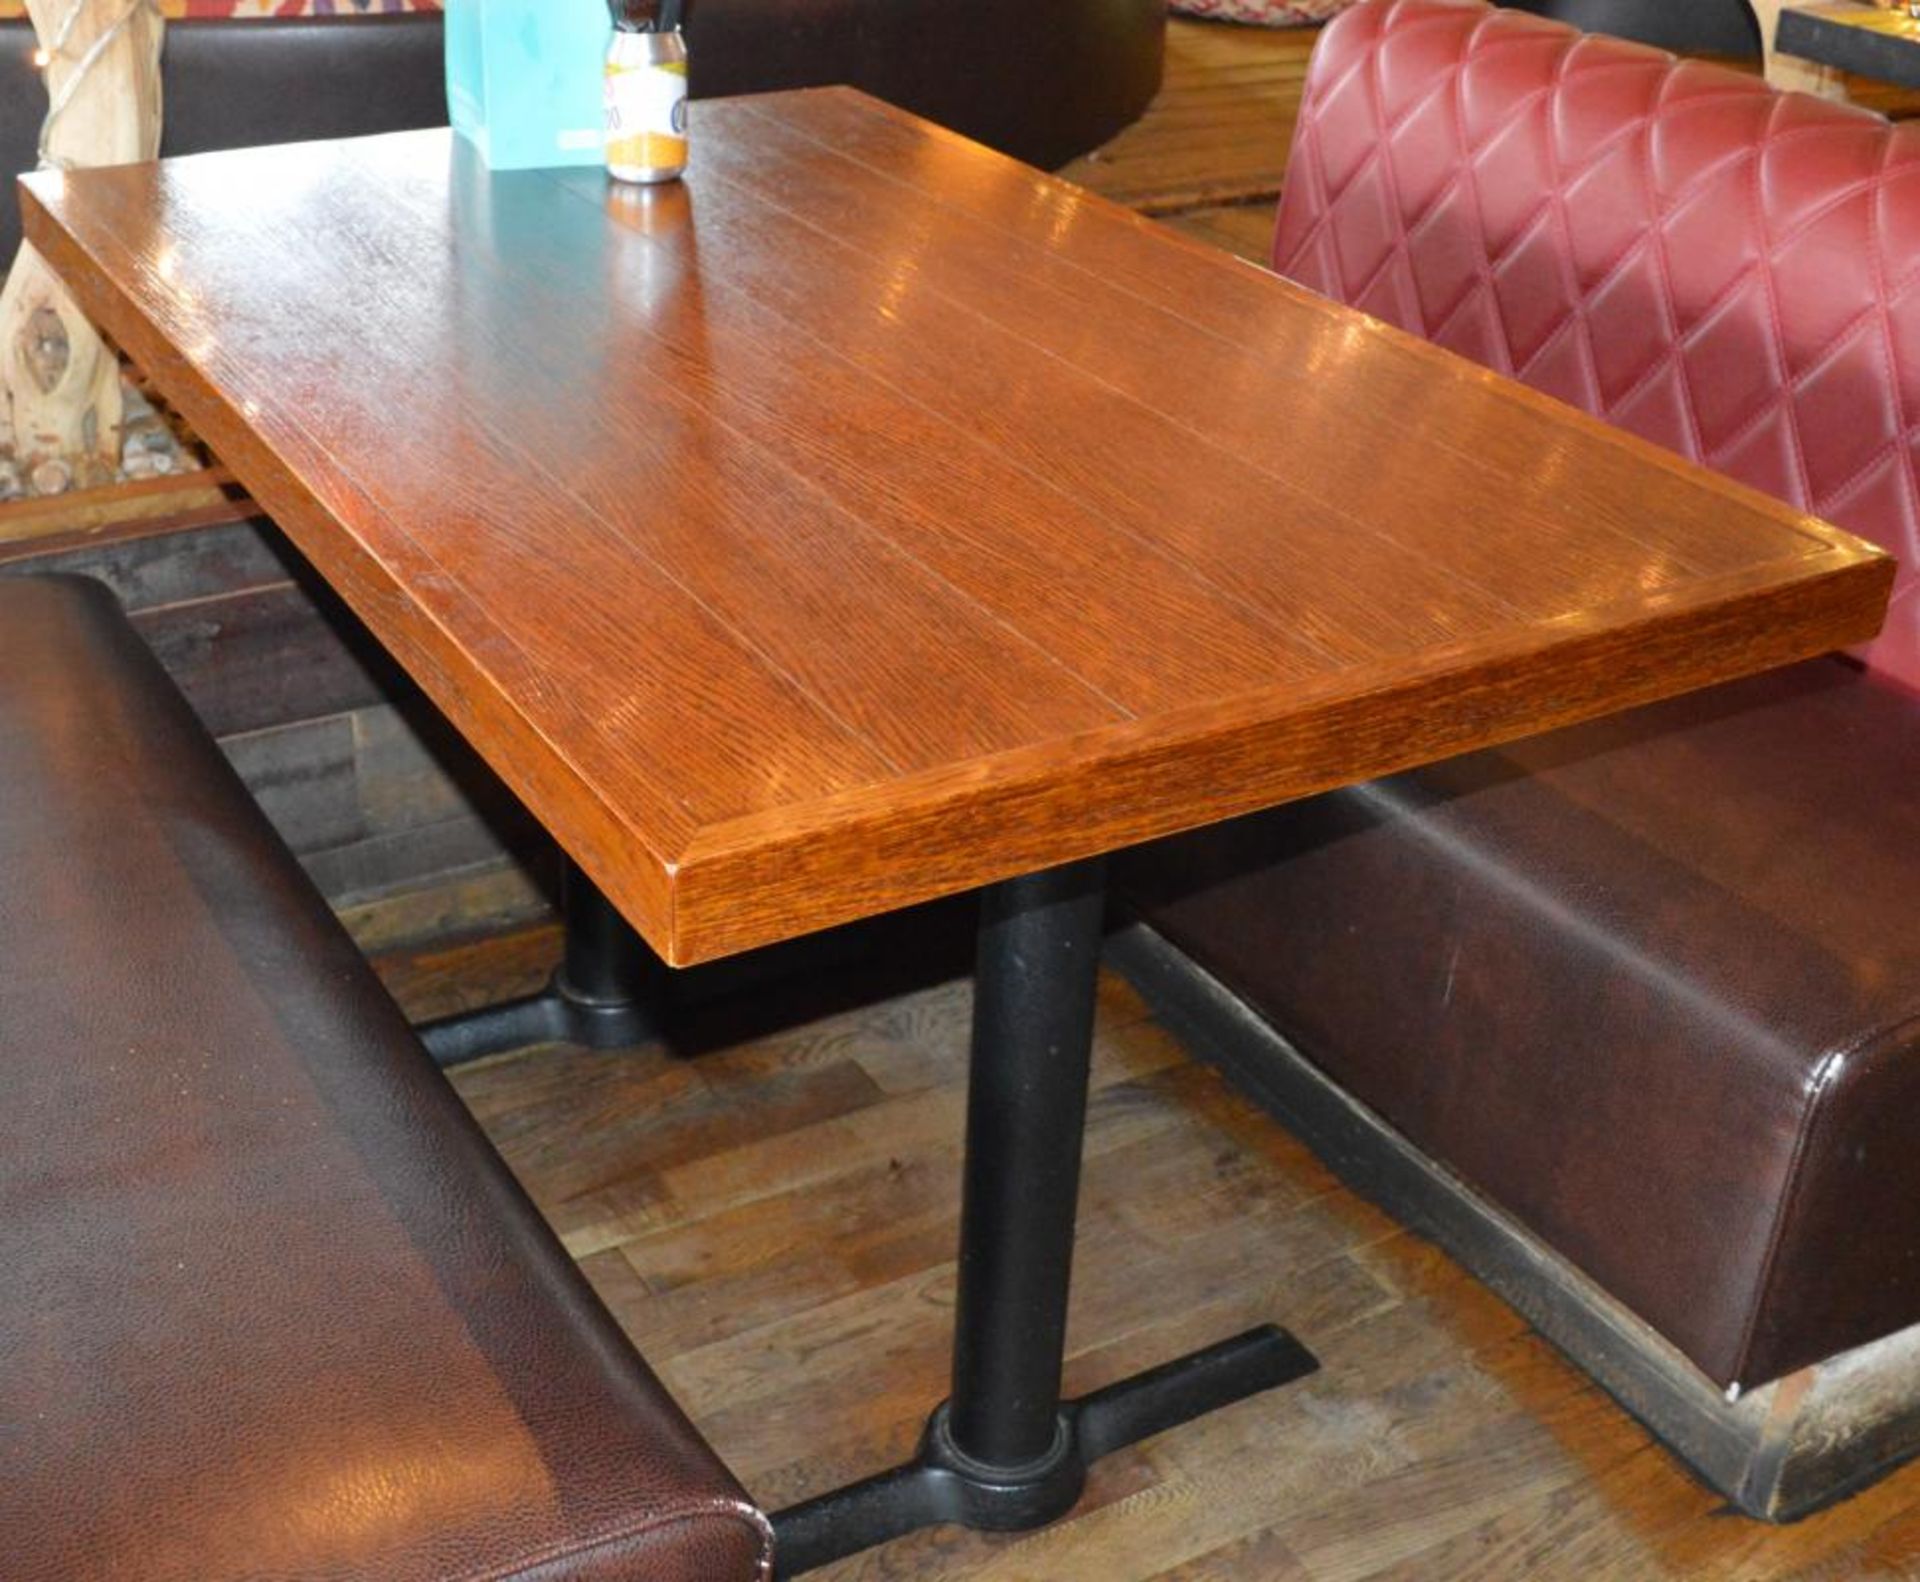 4 x Paneled Design Rectangular Restaurant Dining Tables With Cast Iron Bases - H76 x W120 x D75 cms